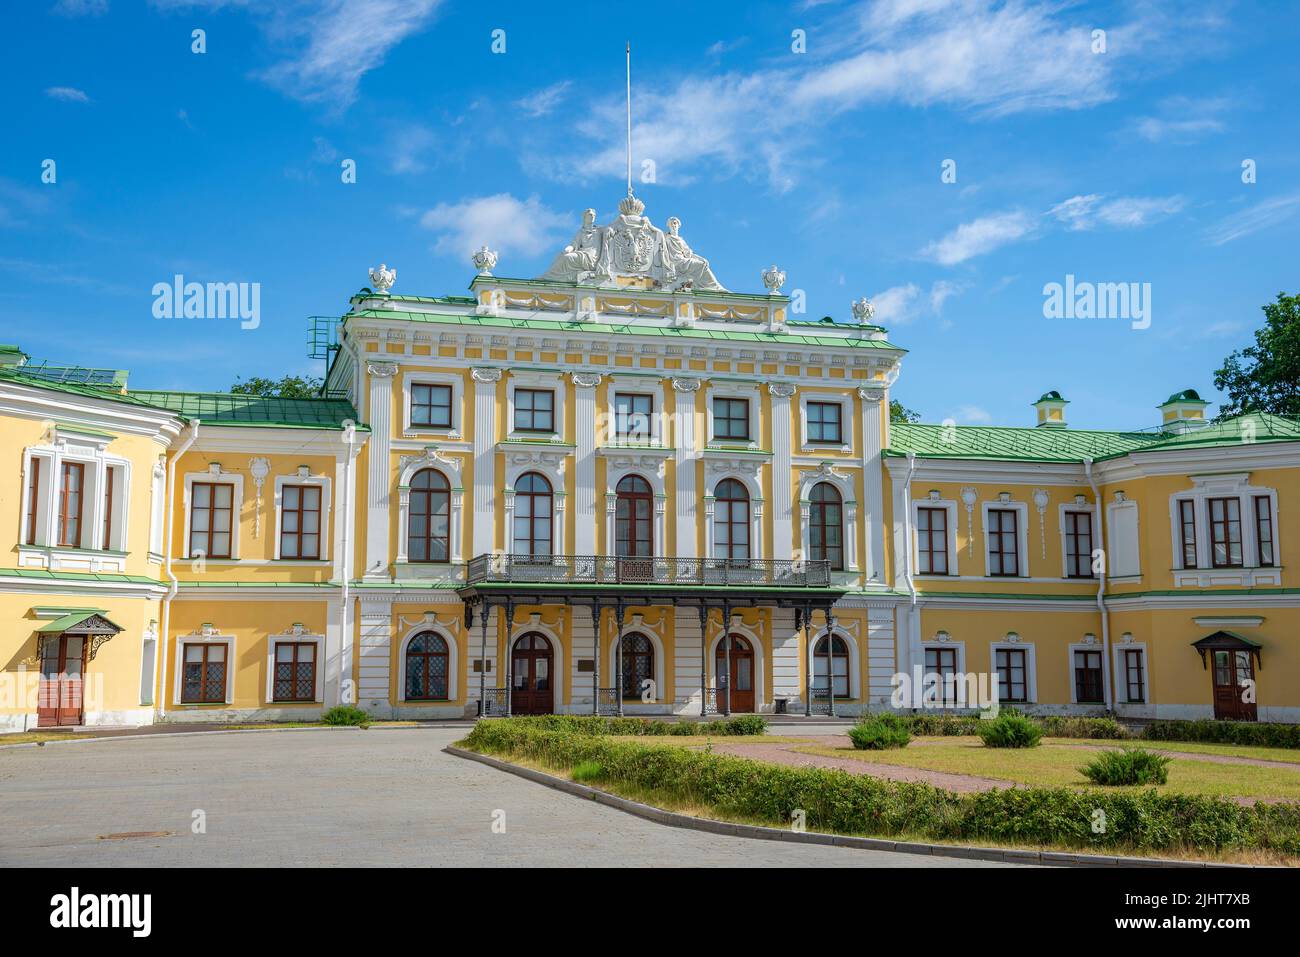 TVER, RUSSIA - JULY 15, 2022: The building of the ancient Imperial Travel Palace. Tver, Russia Stock Photo